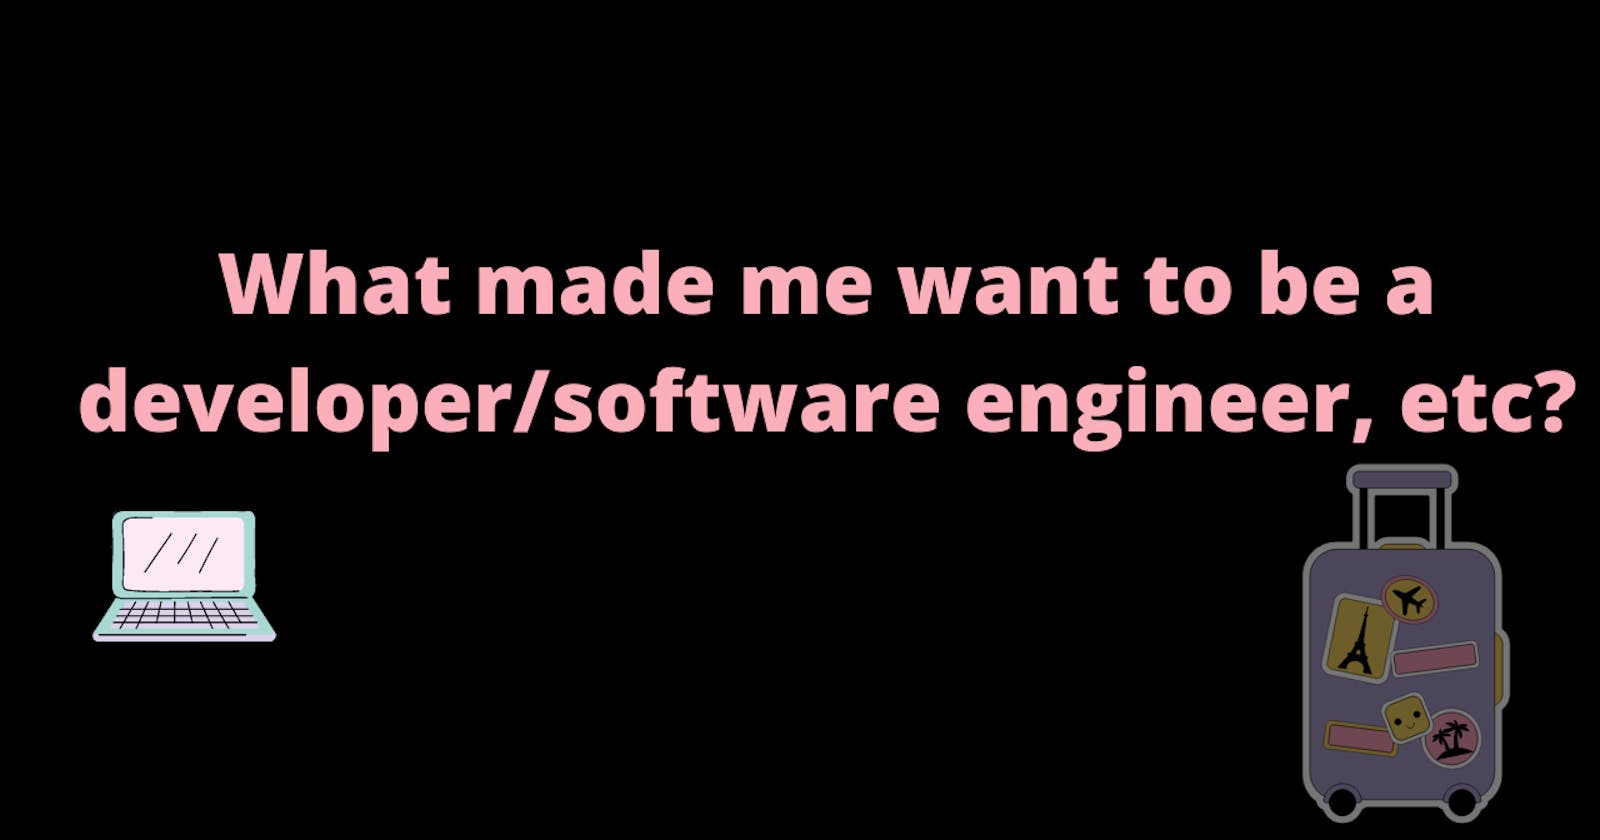 What made me want to be a developer/software engineer, etc?